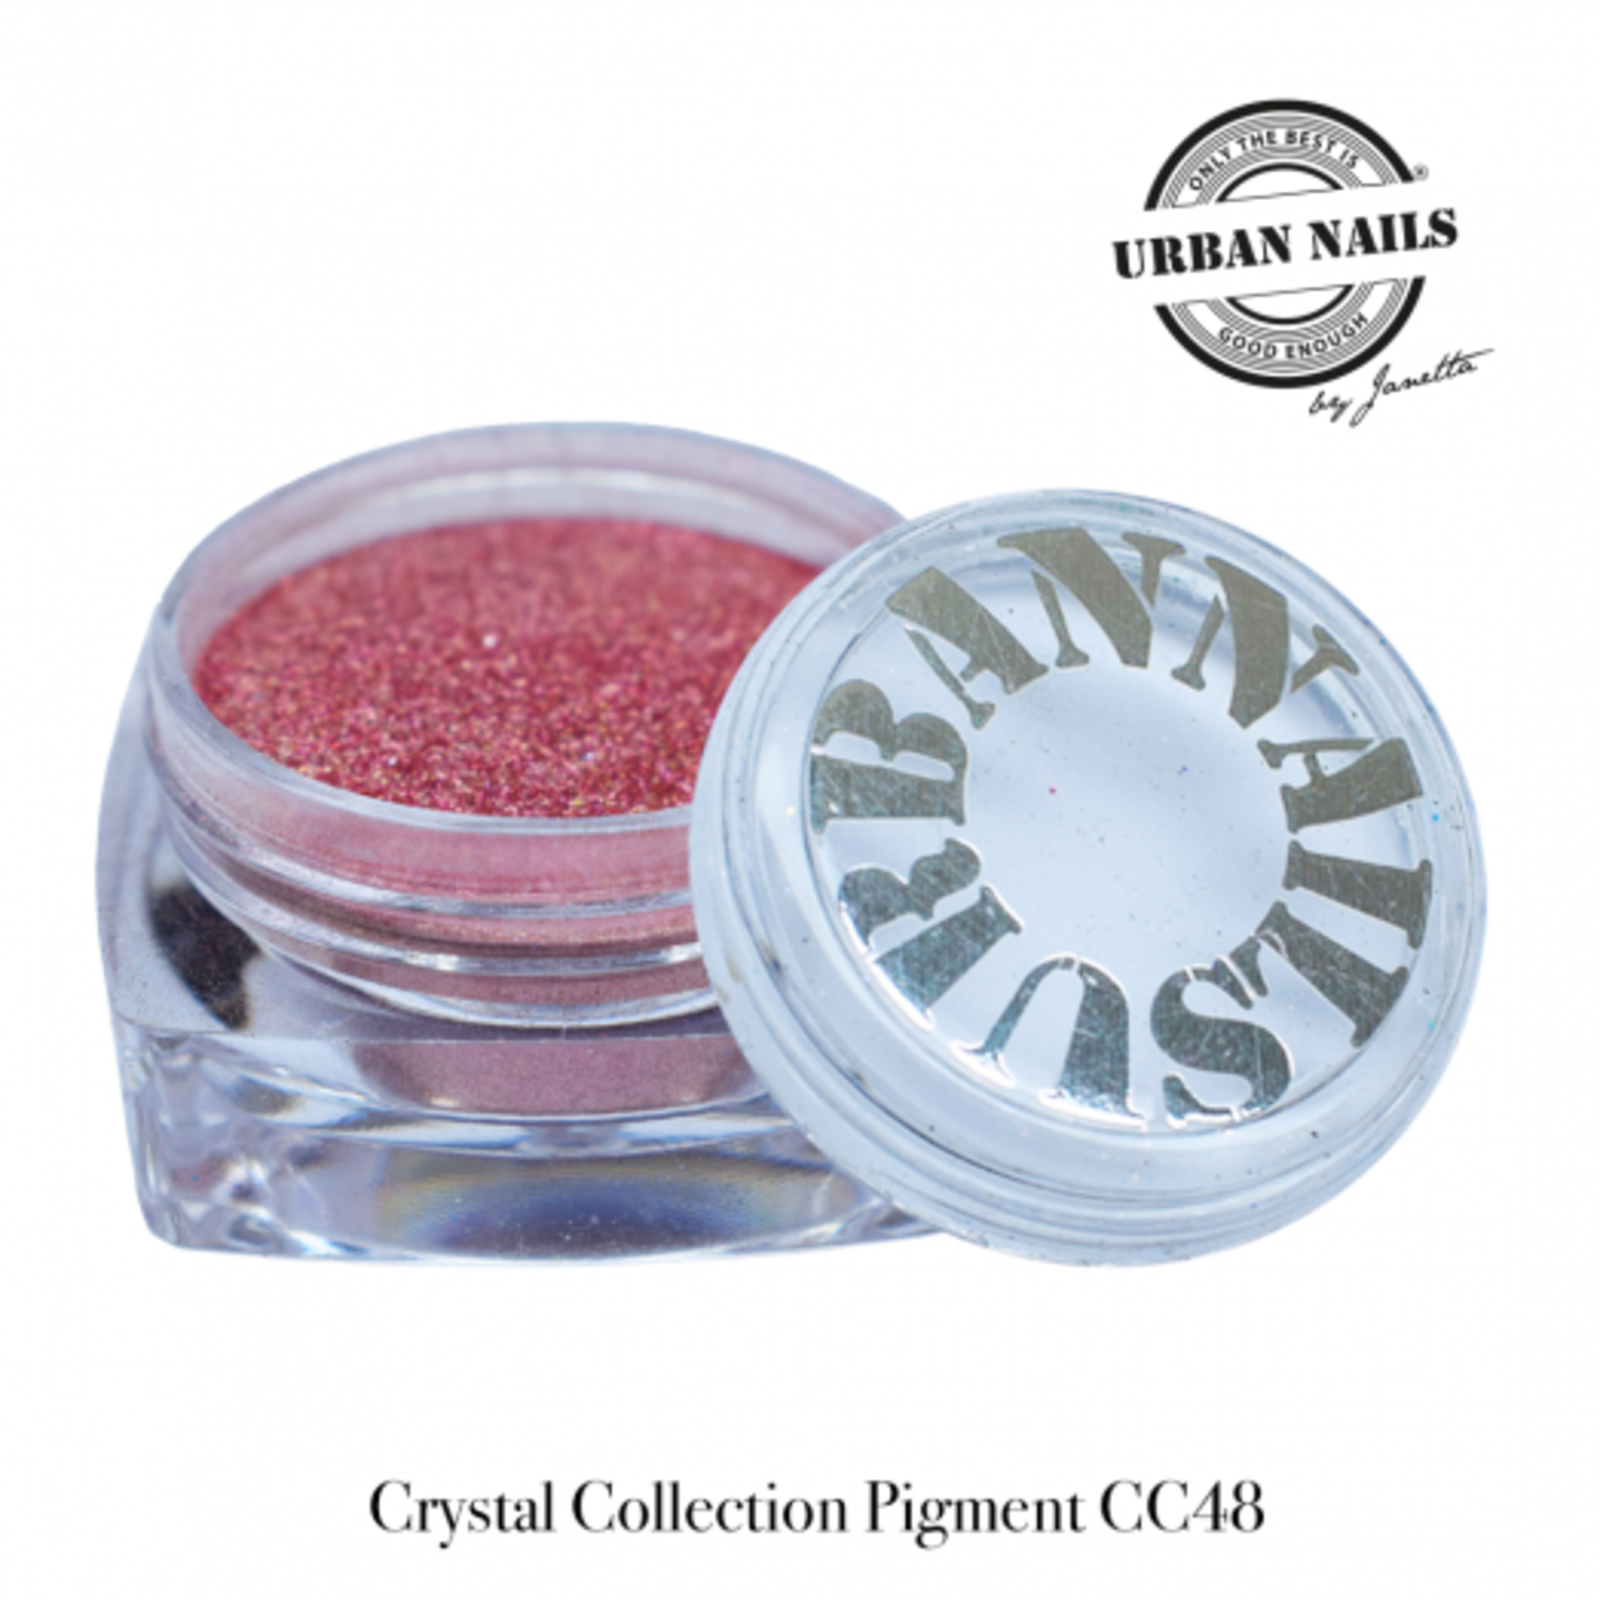 Urban nails Crystal Collection CC48